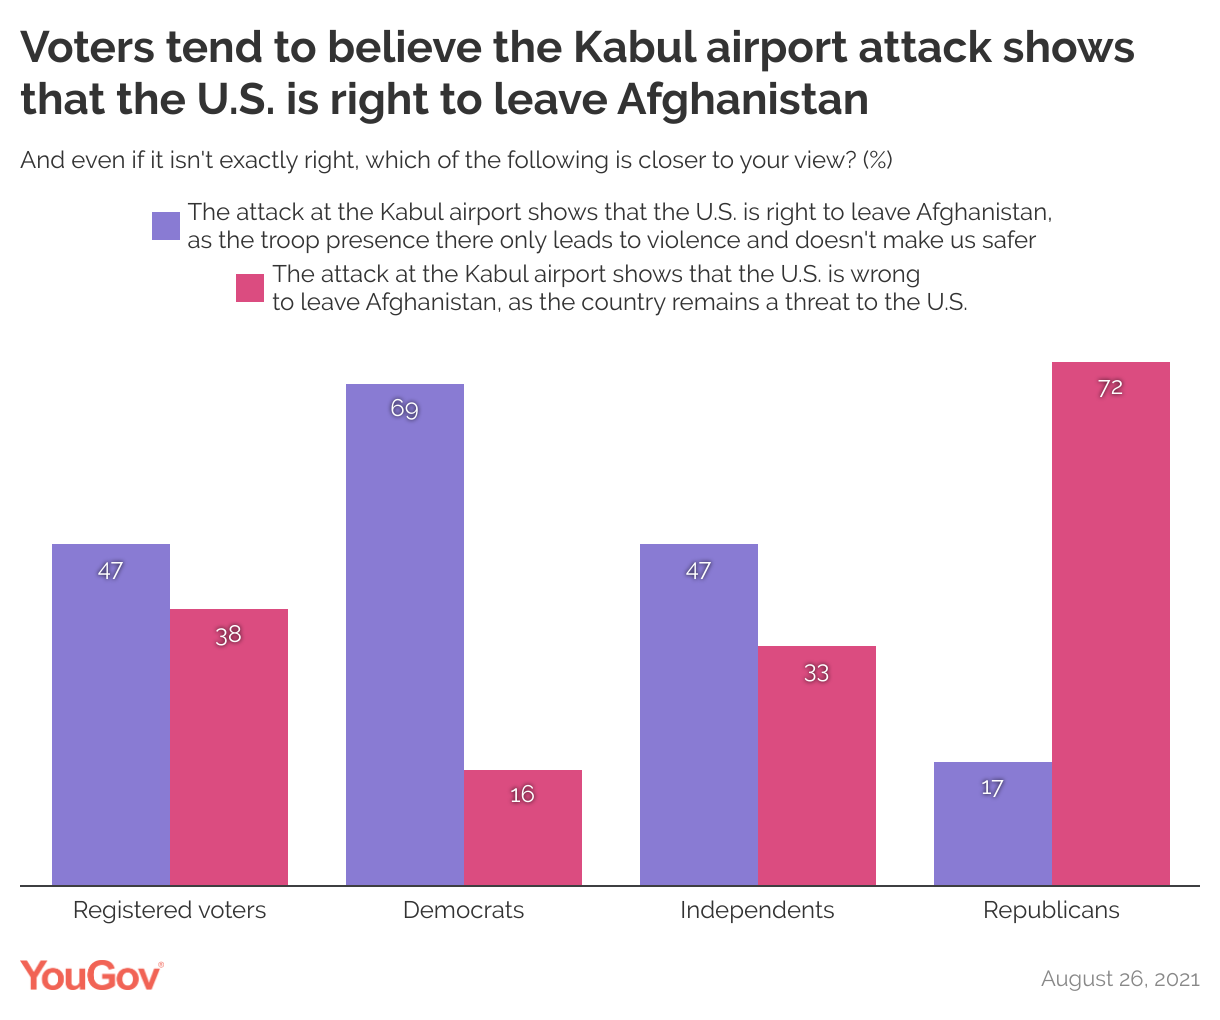 Following the Kabul airport attack, voters are split on whether the U.S. is right to leave Afghanistan